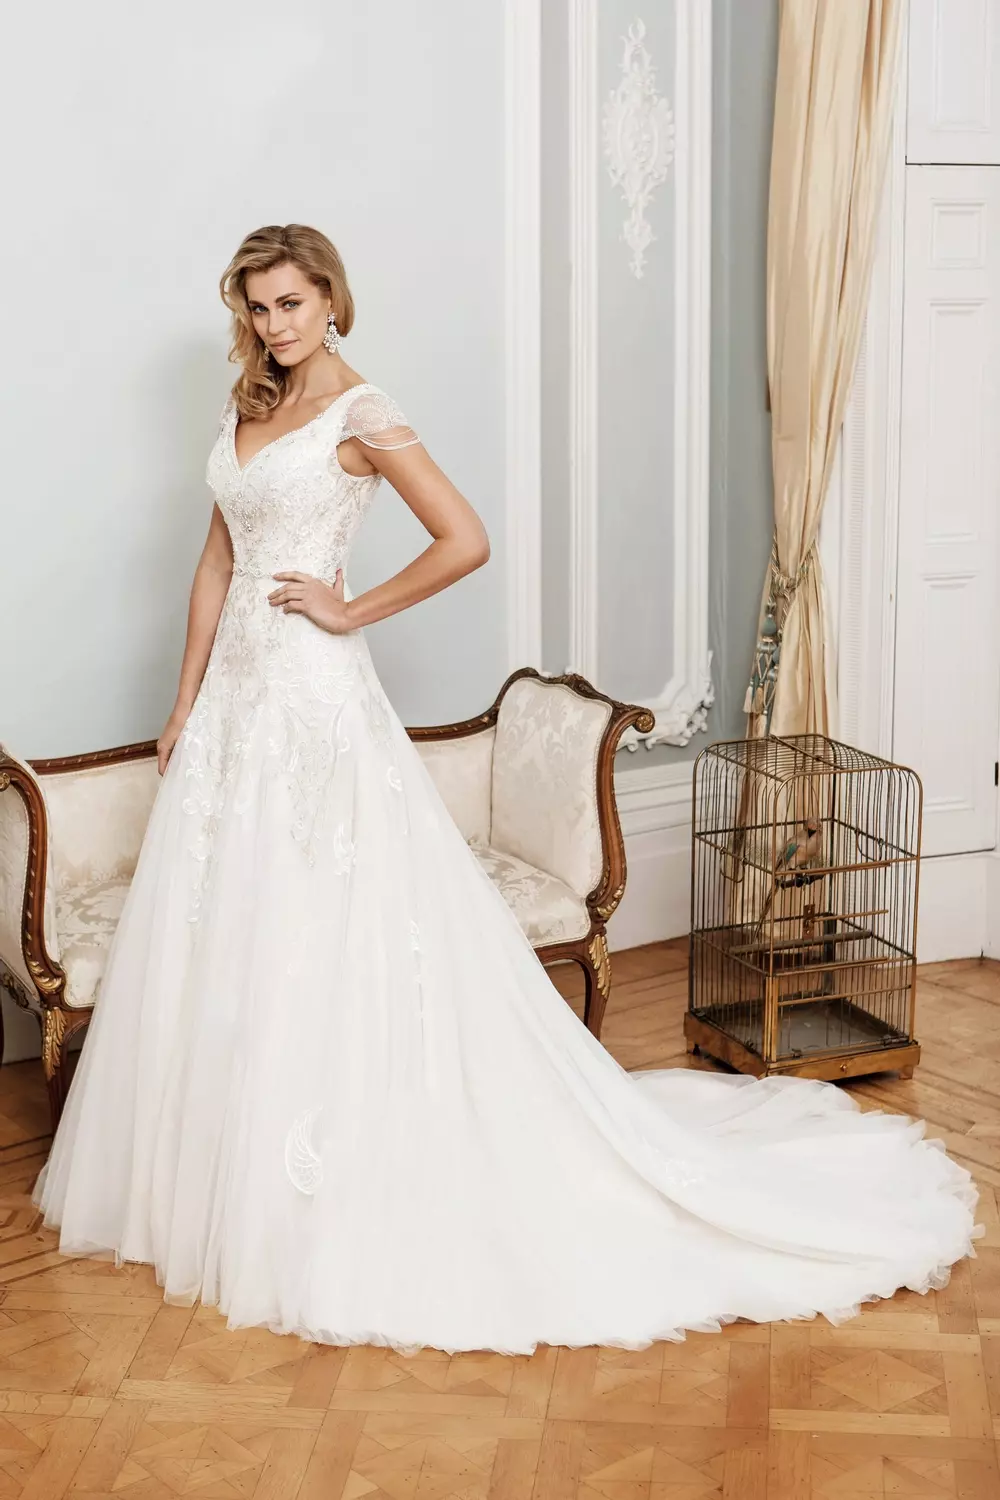 Juliana | Glamorous Lace and Tulle Bridal Gowns | Nicki Flynn